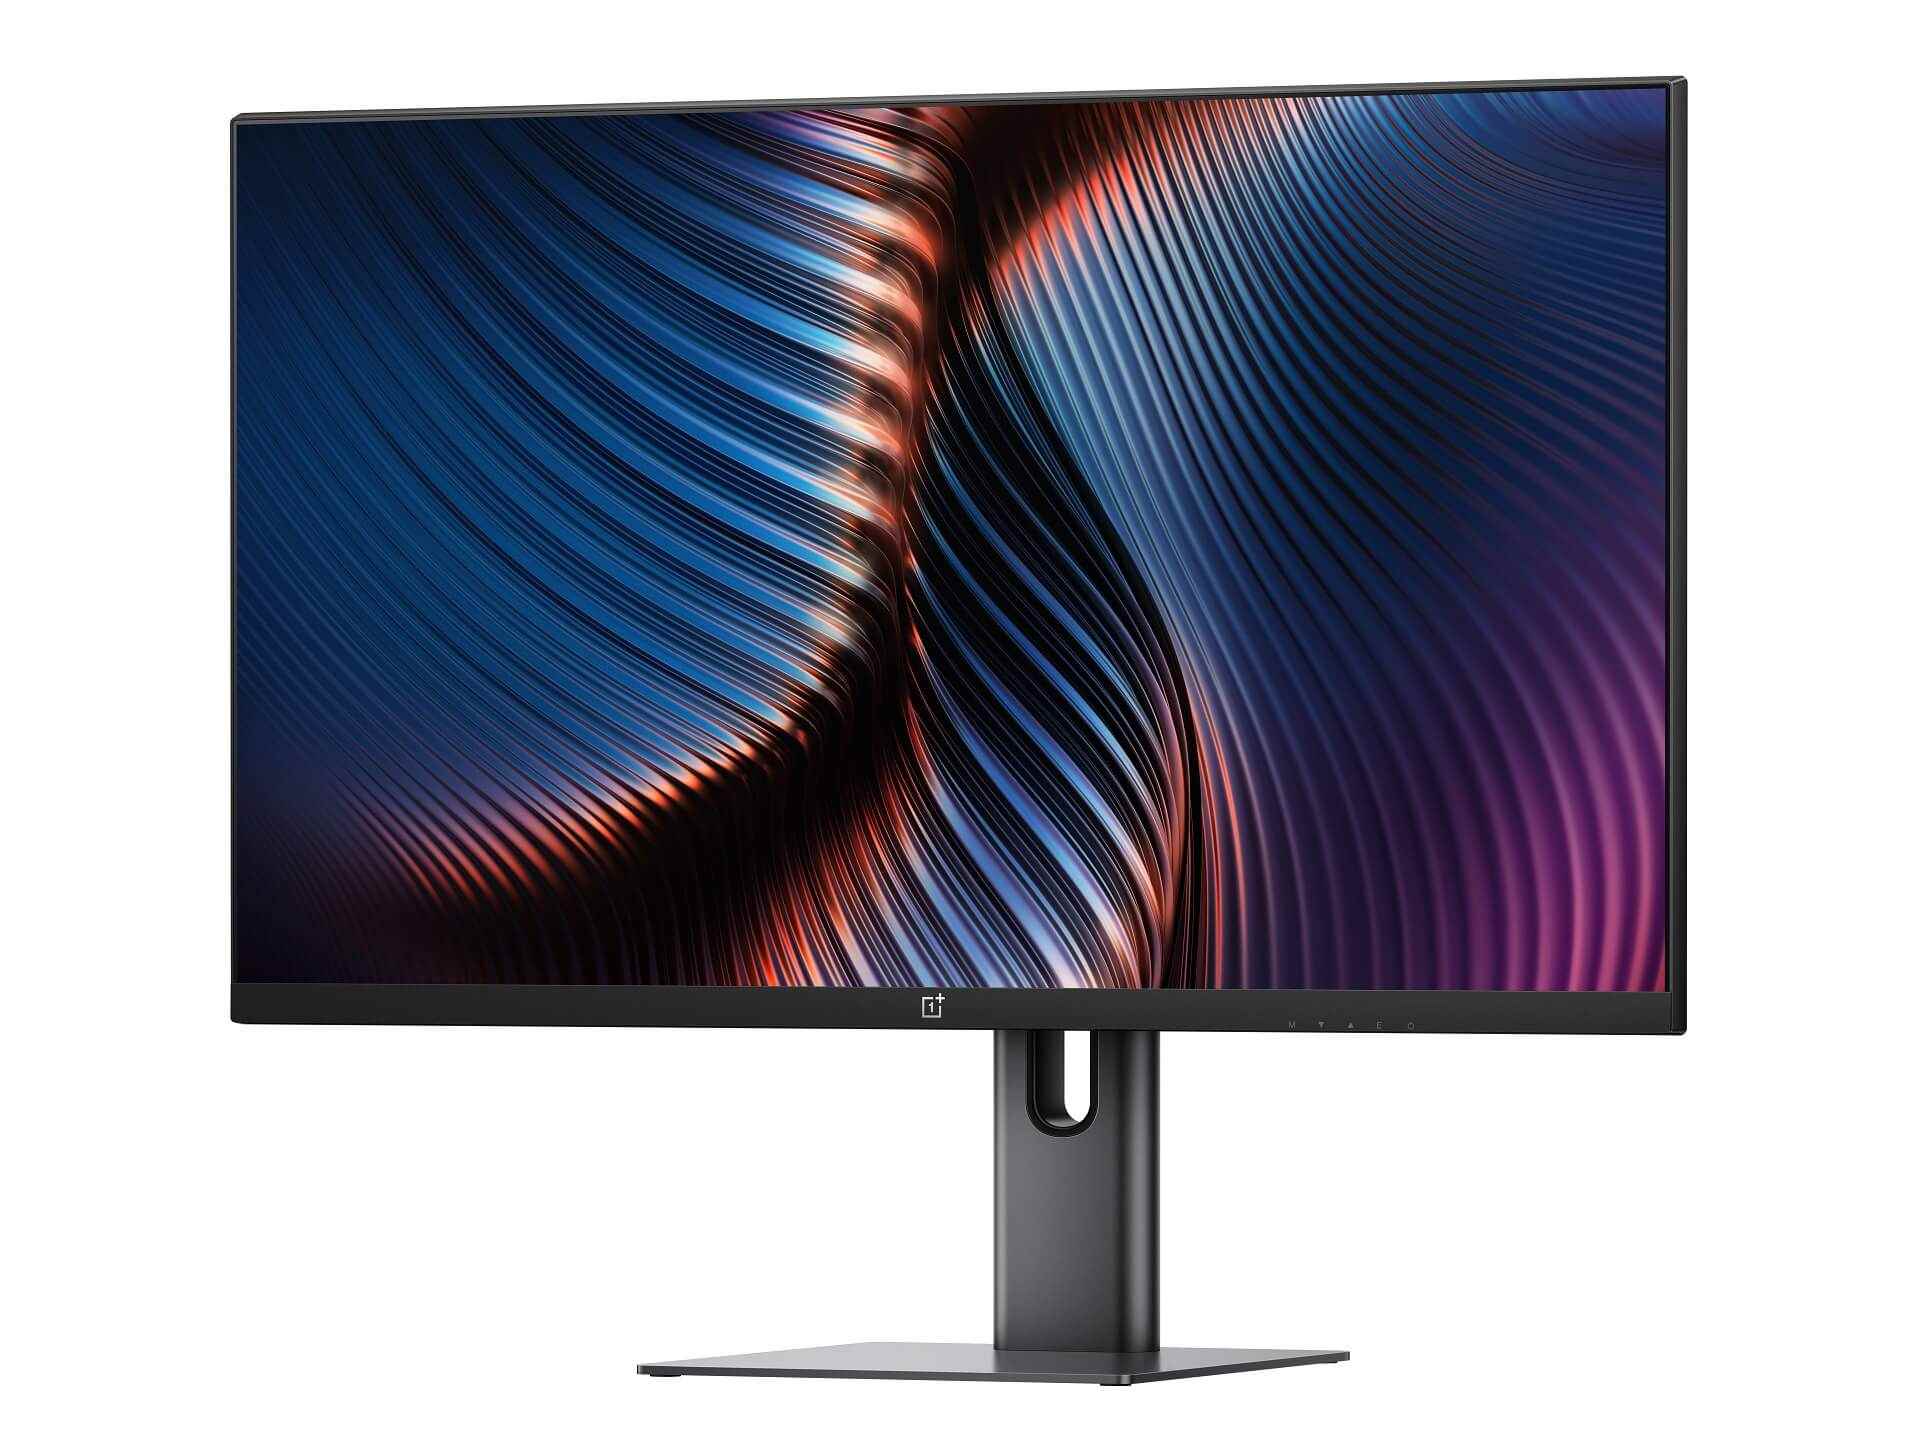 1670906848 898 OnePlus launches X 27 QHD 165Hz gaming monitor